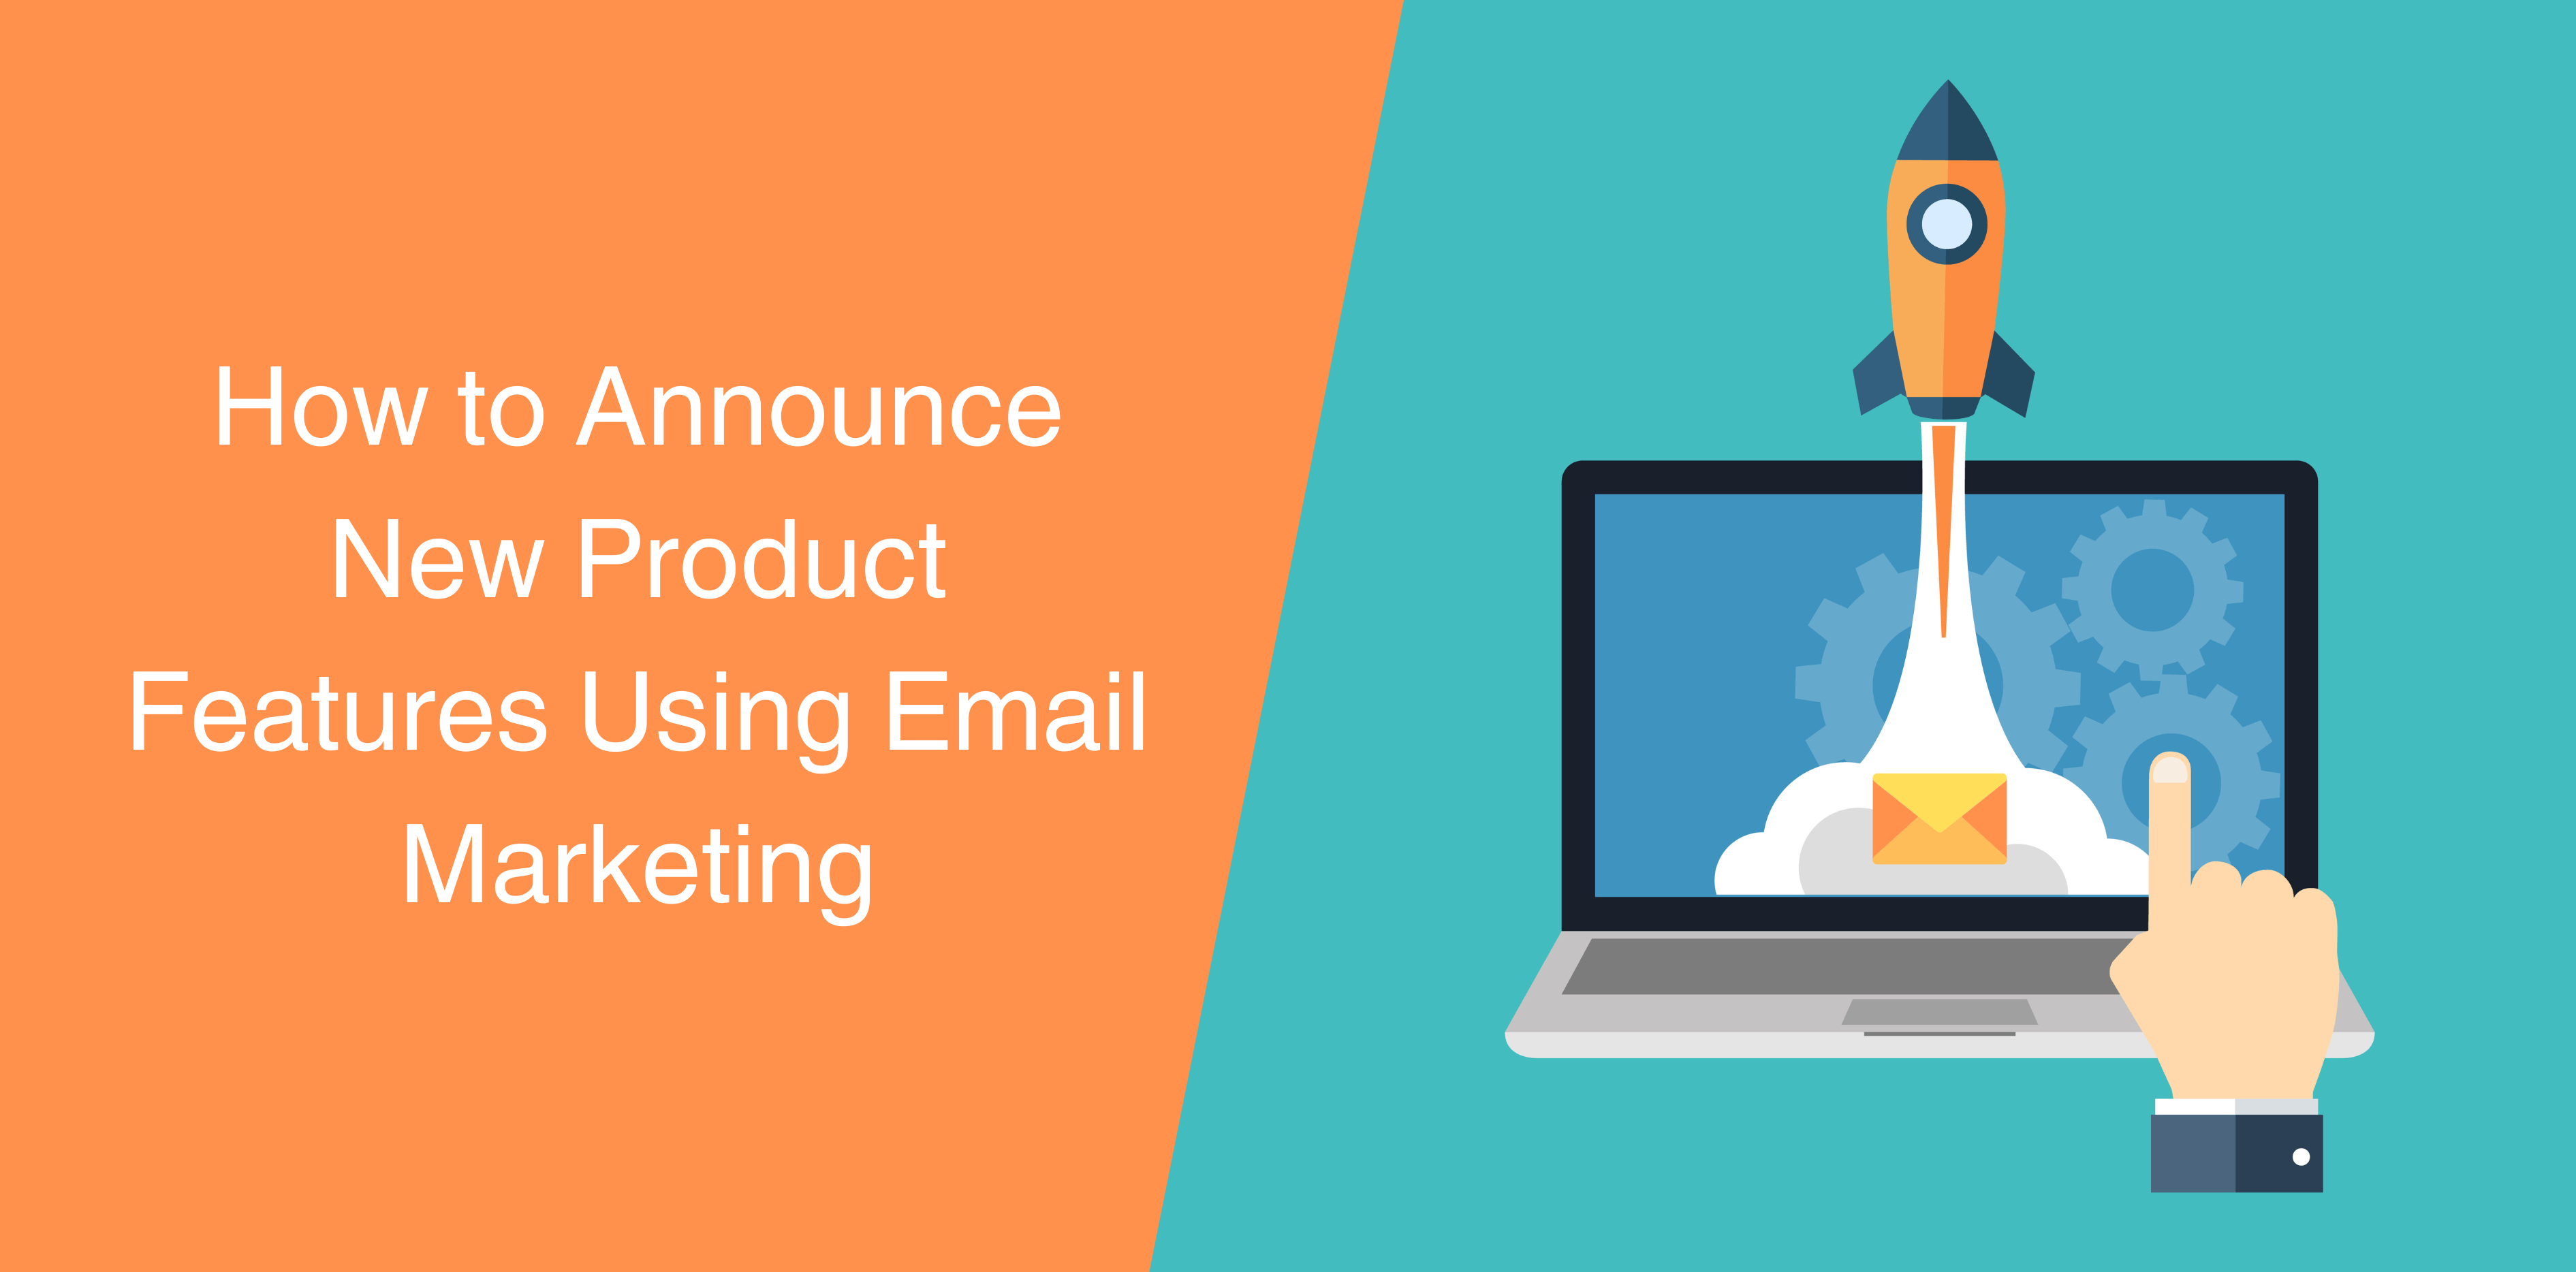 How to Announce New Product Features Using Email Marketing